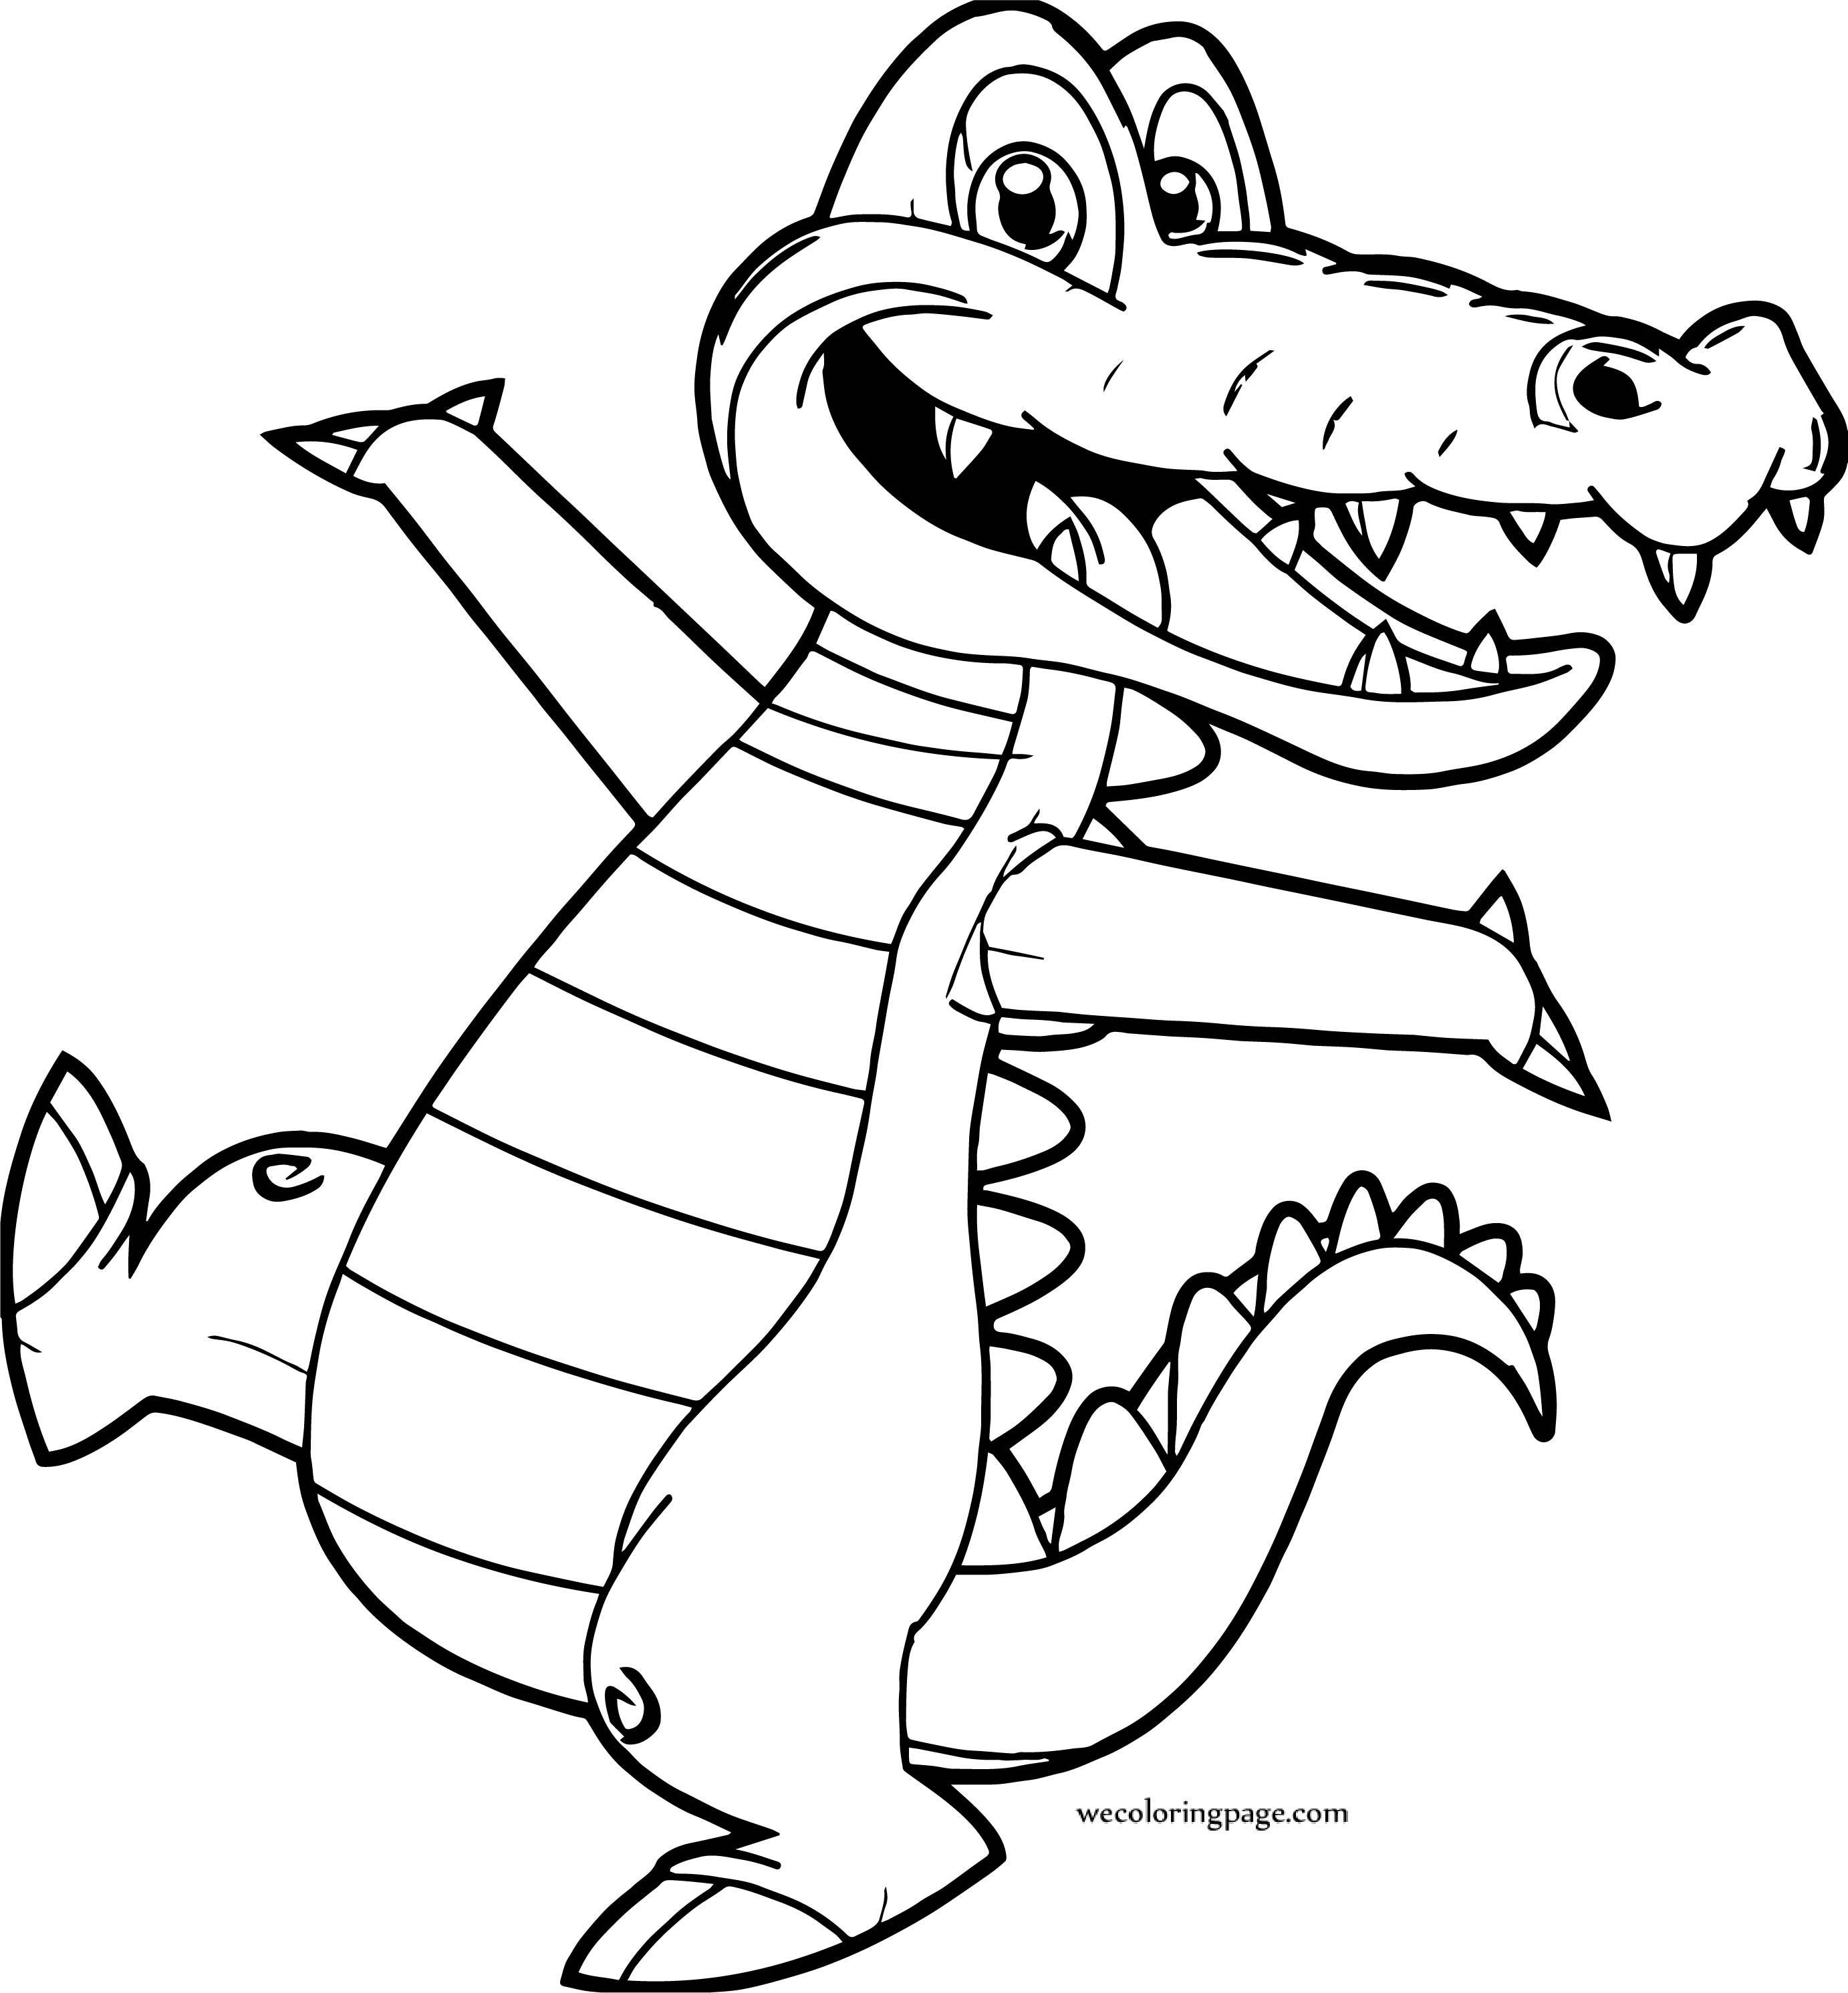 alligator-printable-coloring-pages